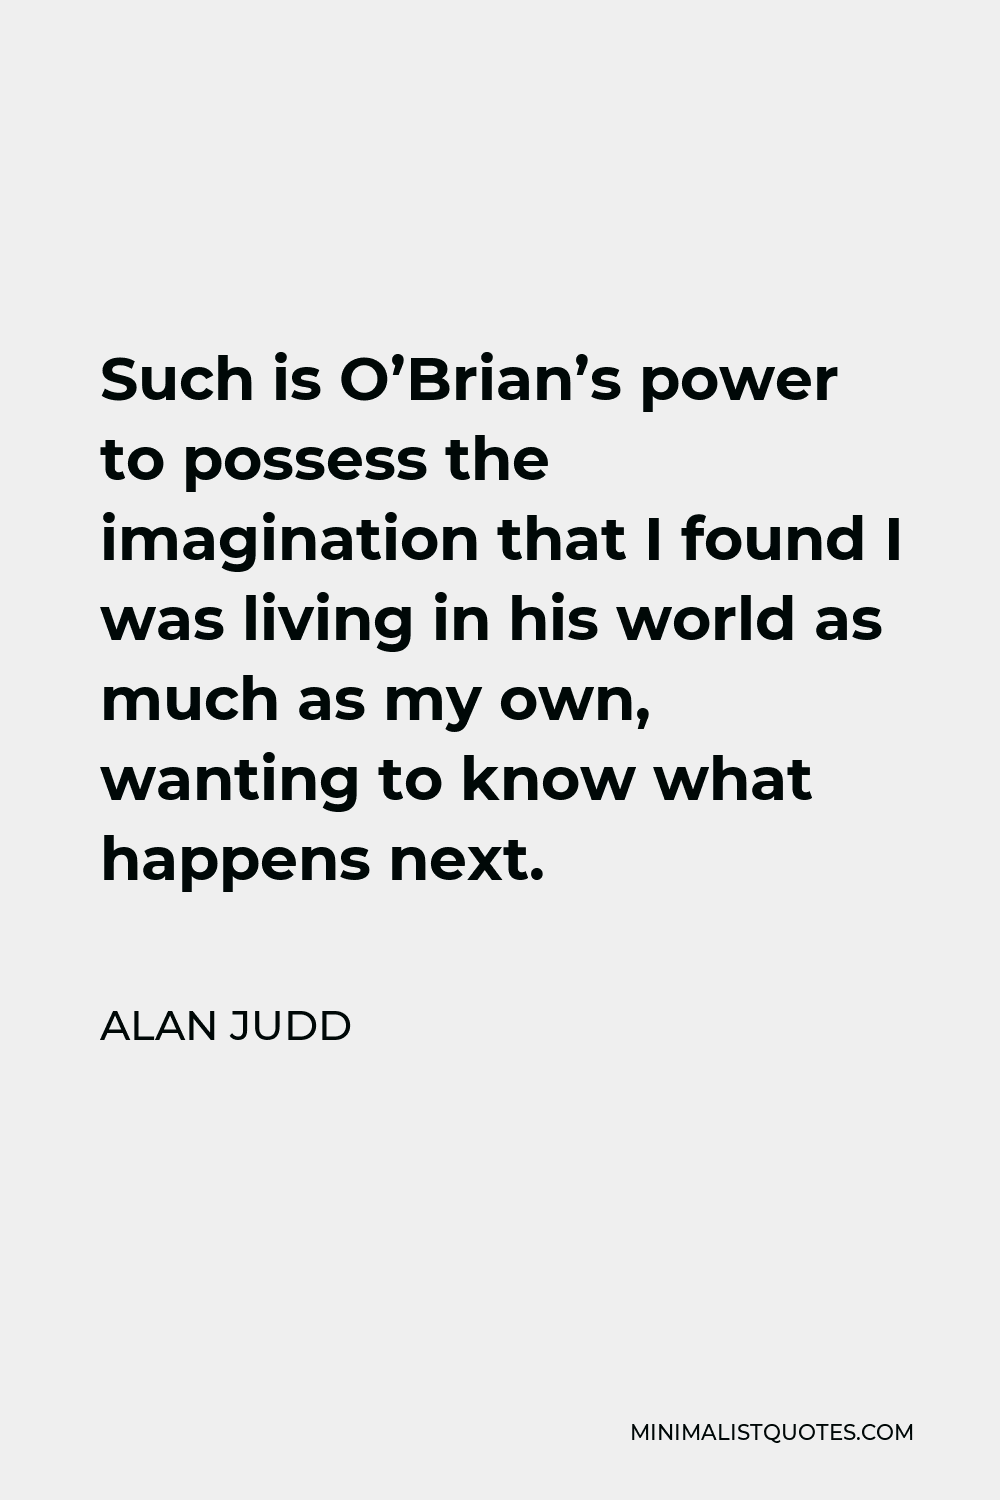 Alan Judd Quote - Such is O’Brian’s power to possess the imagination that I found I was living in his world as much as my own, wanting to know what happens next.